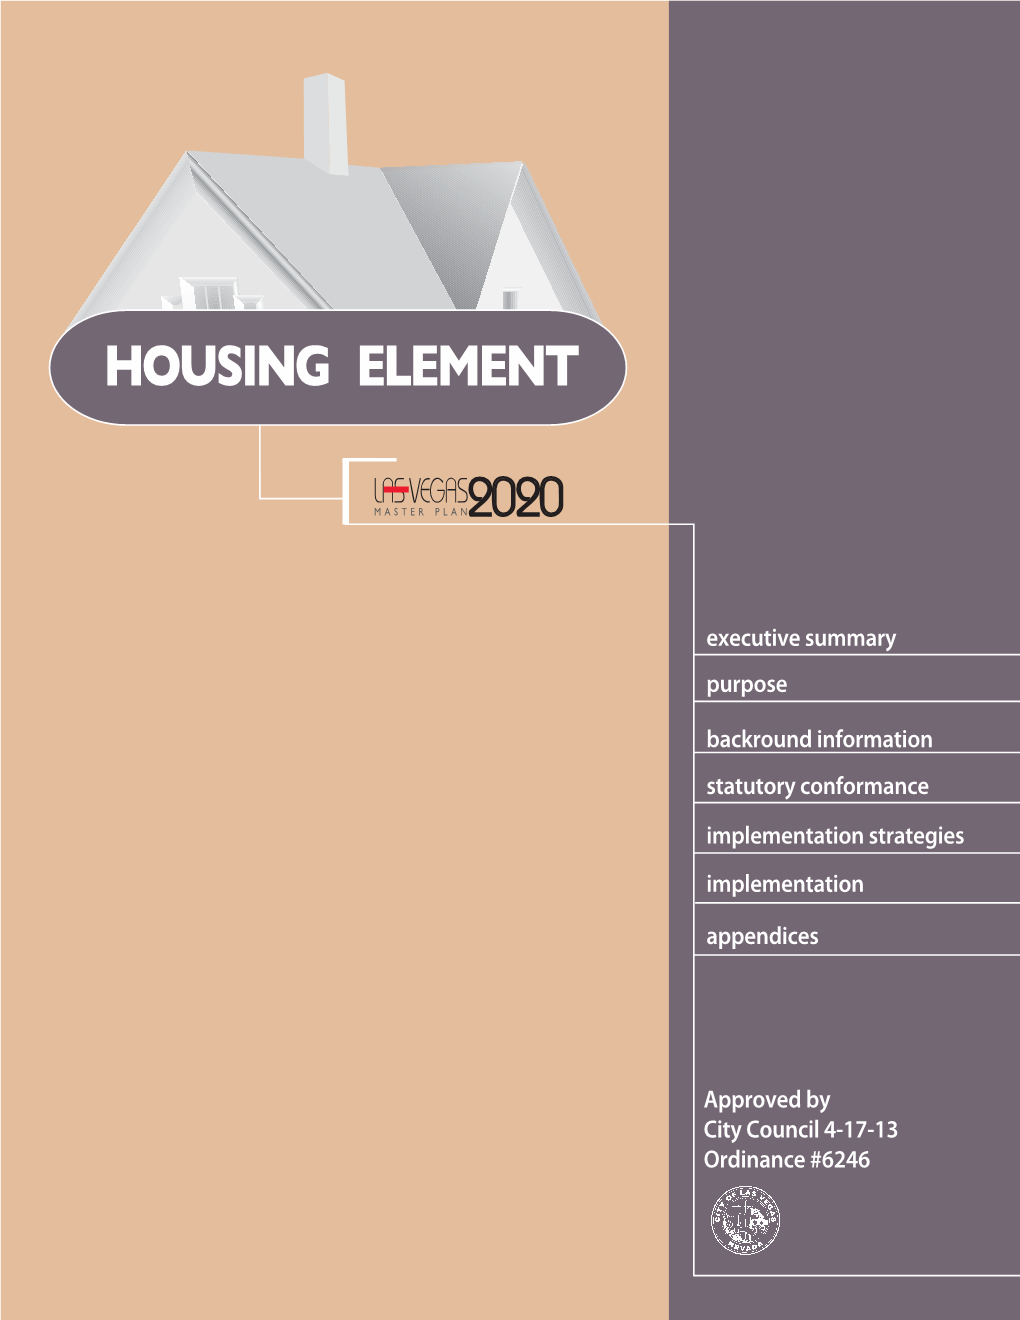 Housing Element of the Las Vegas 2020 Master Plan Was Approved by City Council on April 17, 2013 (Ordinance #6246) Housing Element